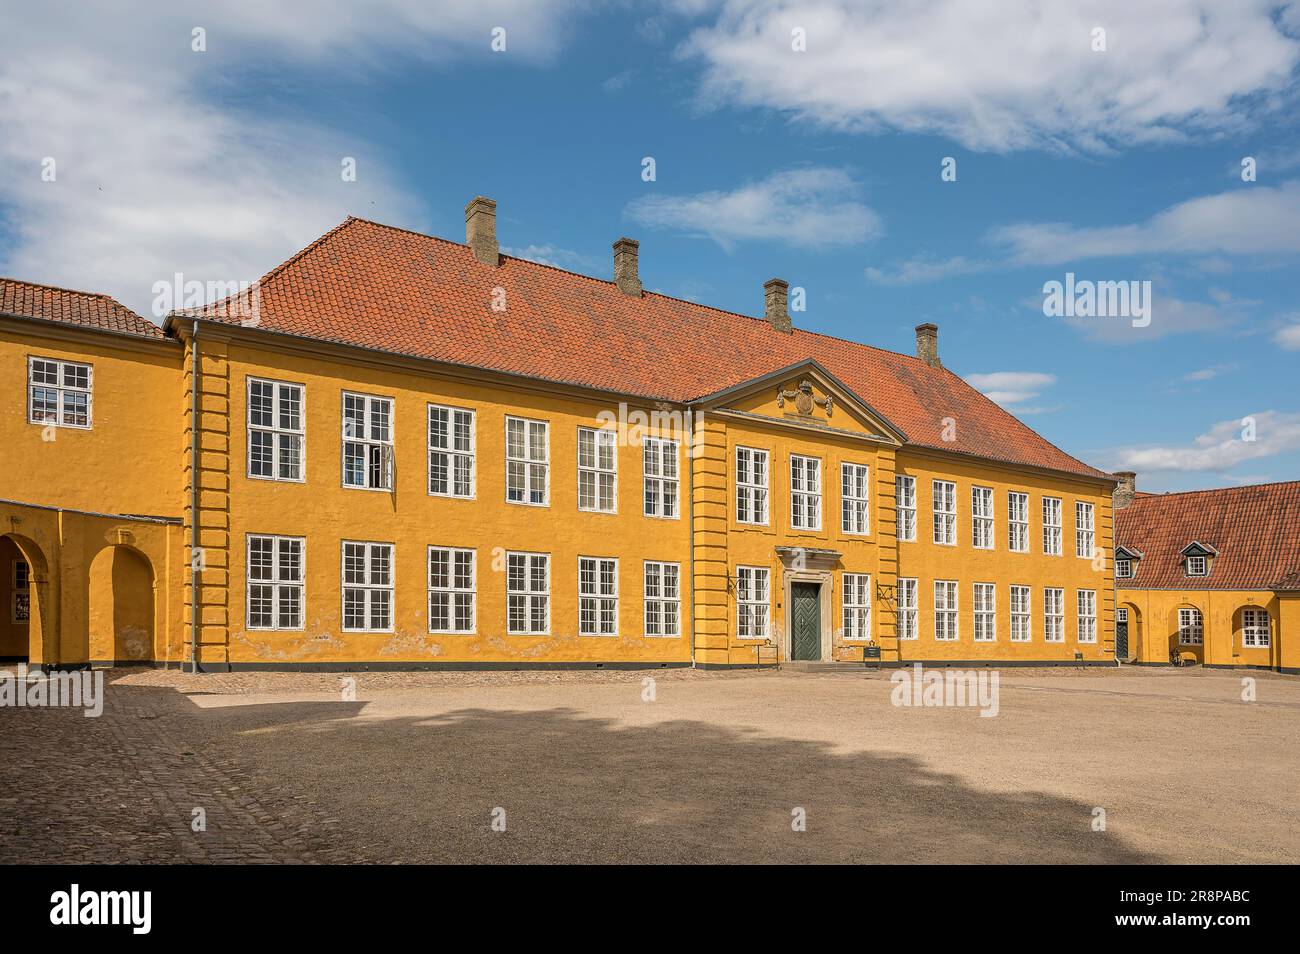 hi-res stock photography images - Alamy